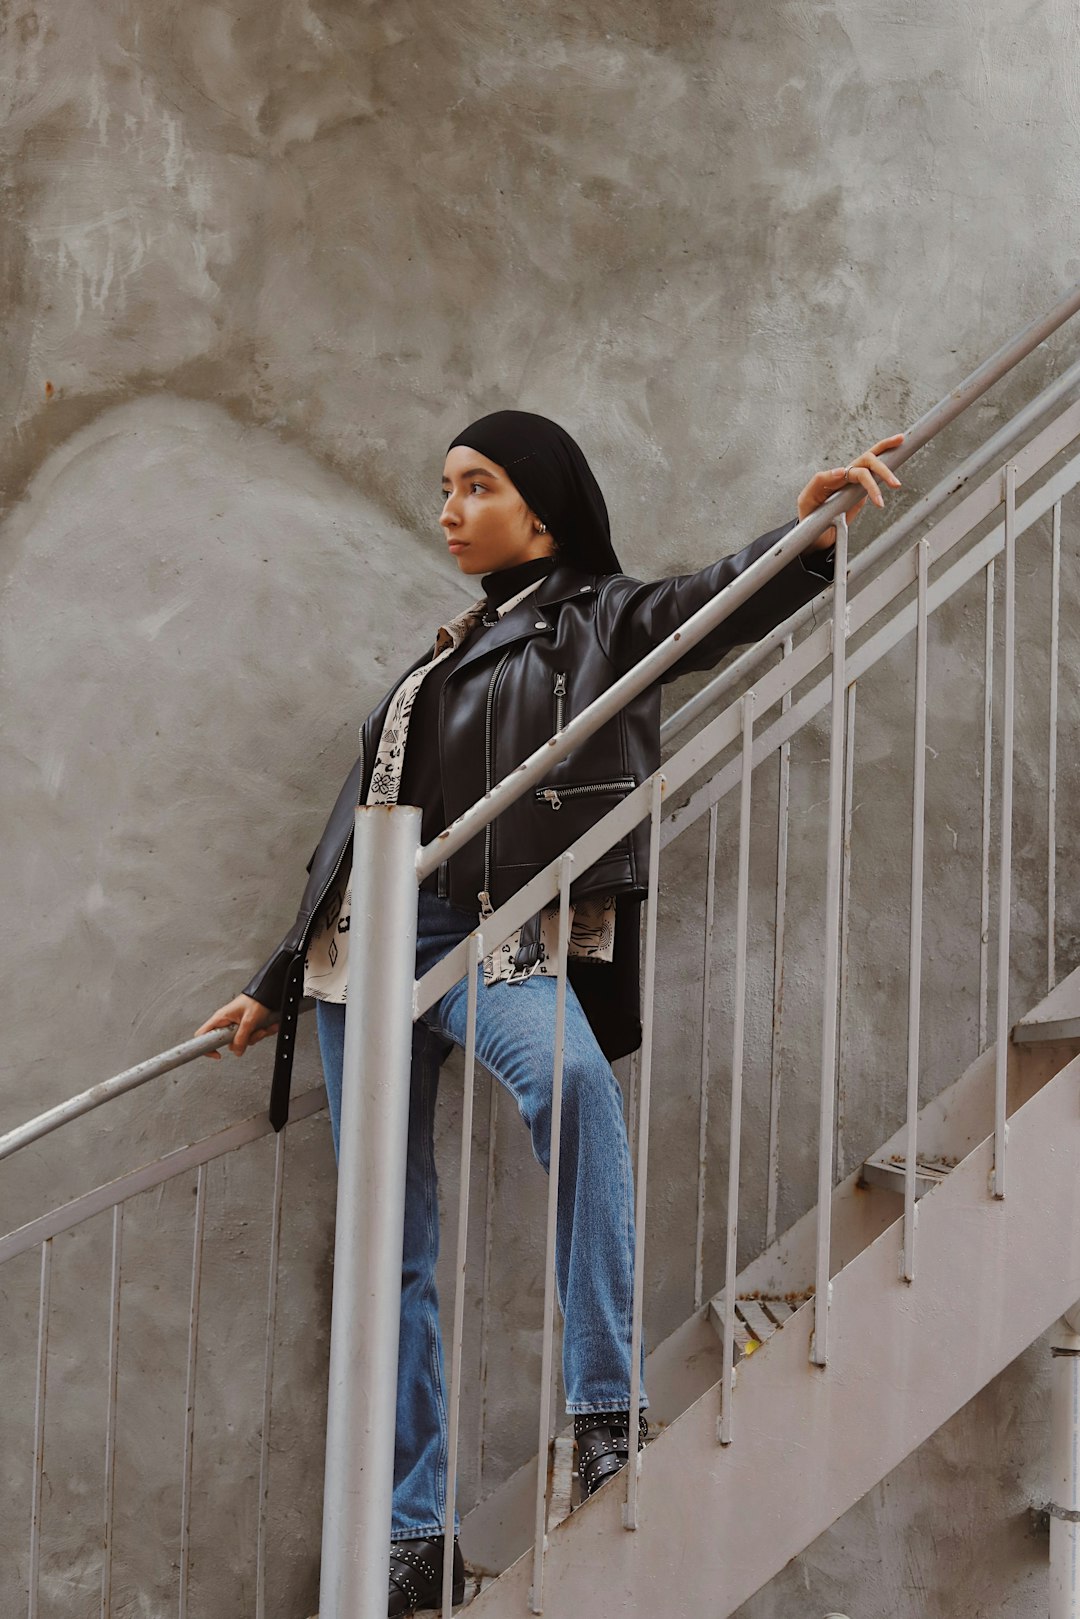 woman in black hijab and blue denim jeans sitting on white metal railings